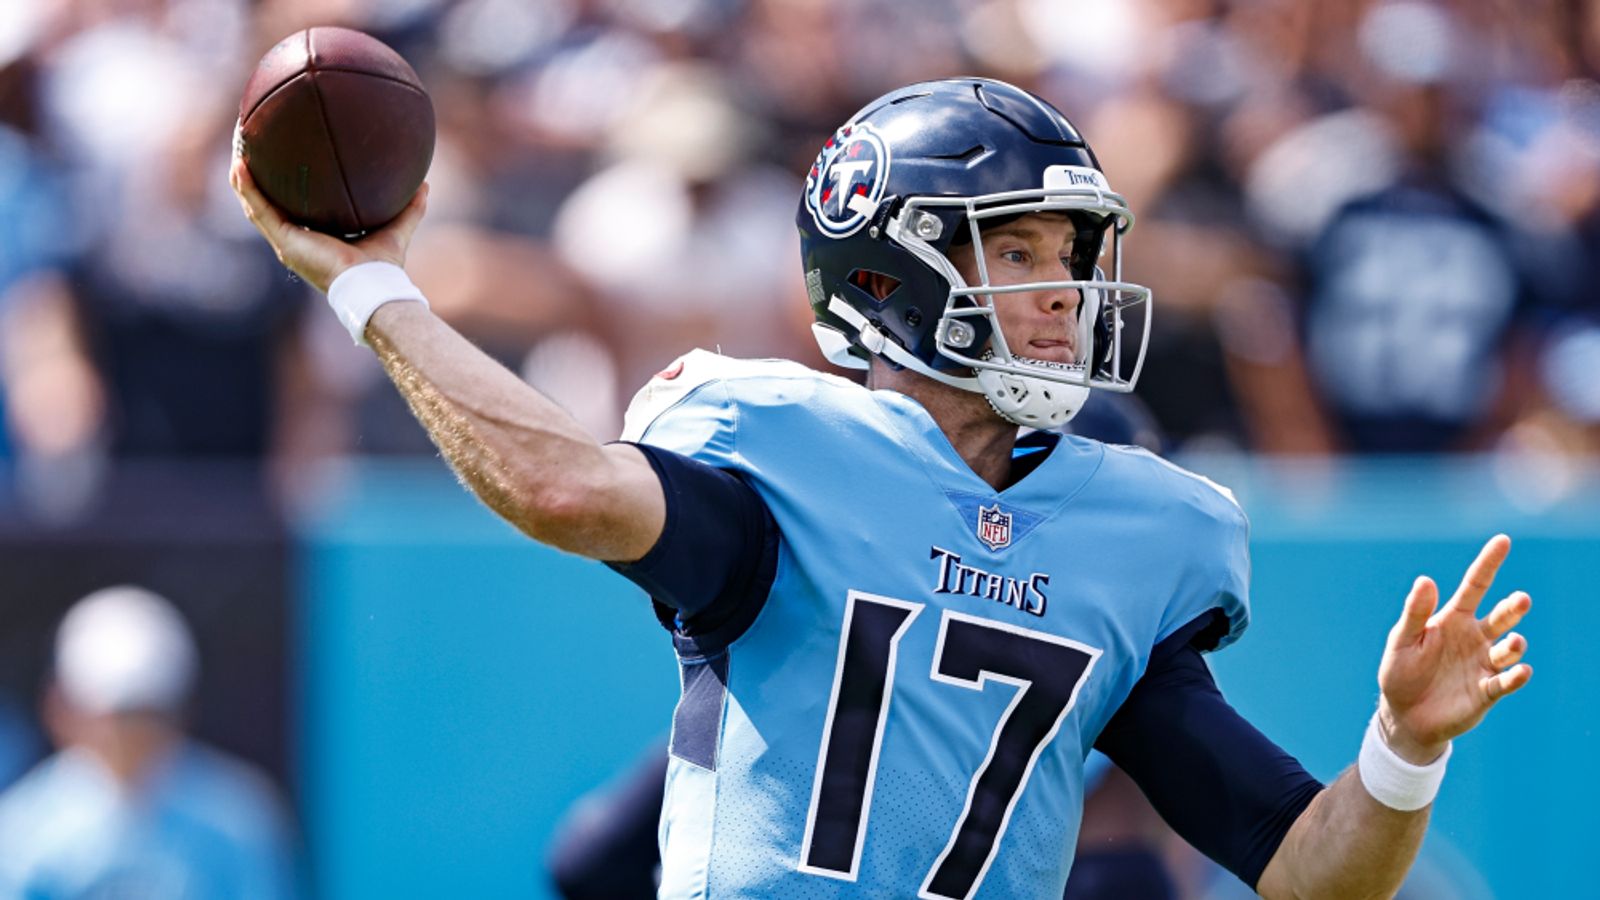 Steelers Get Powerful Answer From Titans’ Ryan Tannehill On Helping